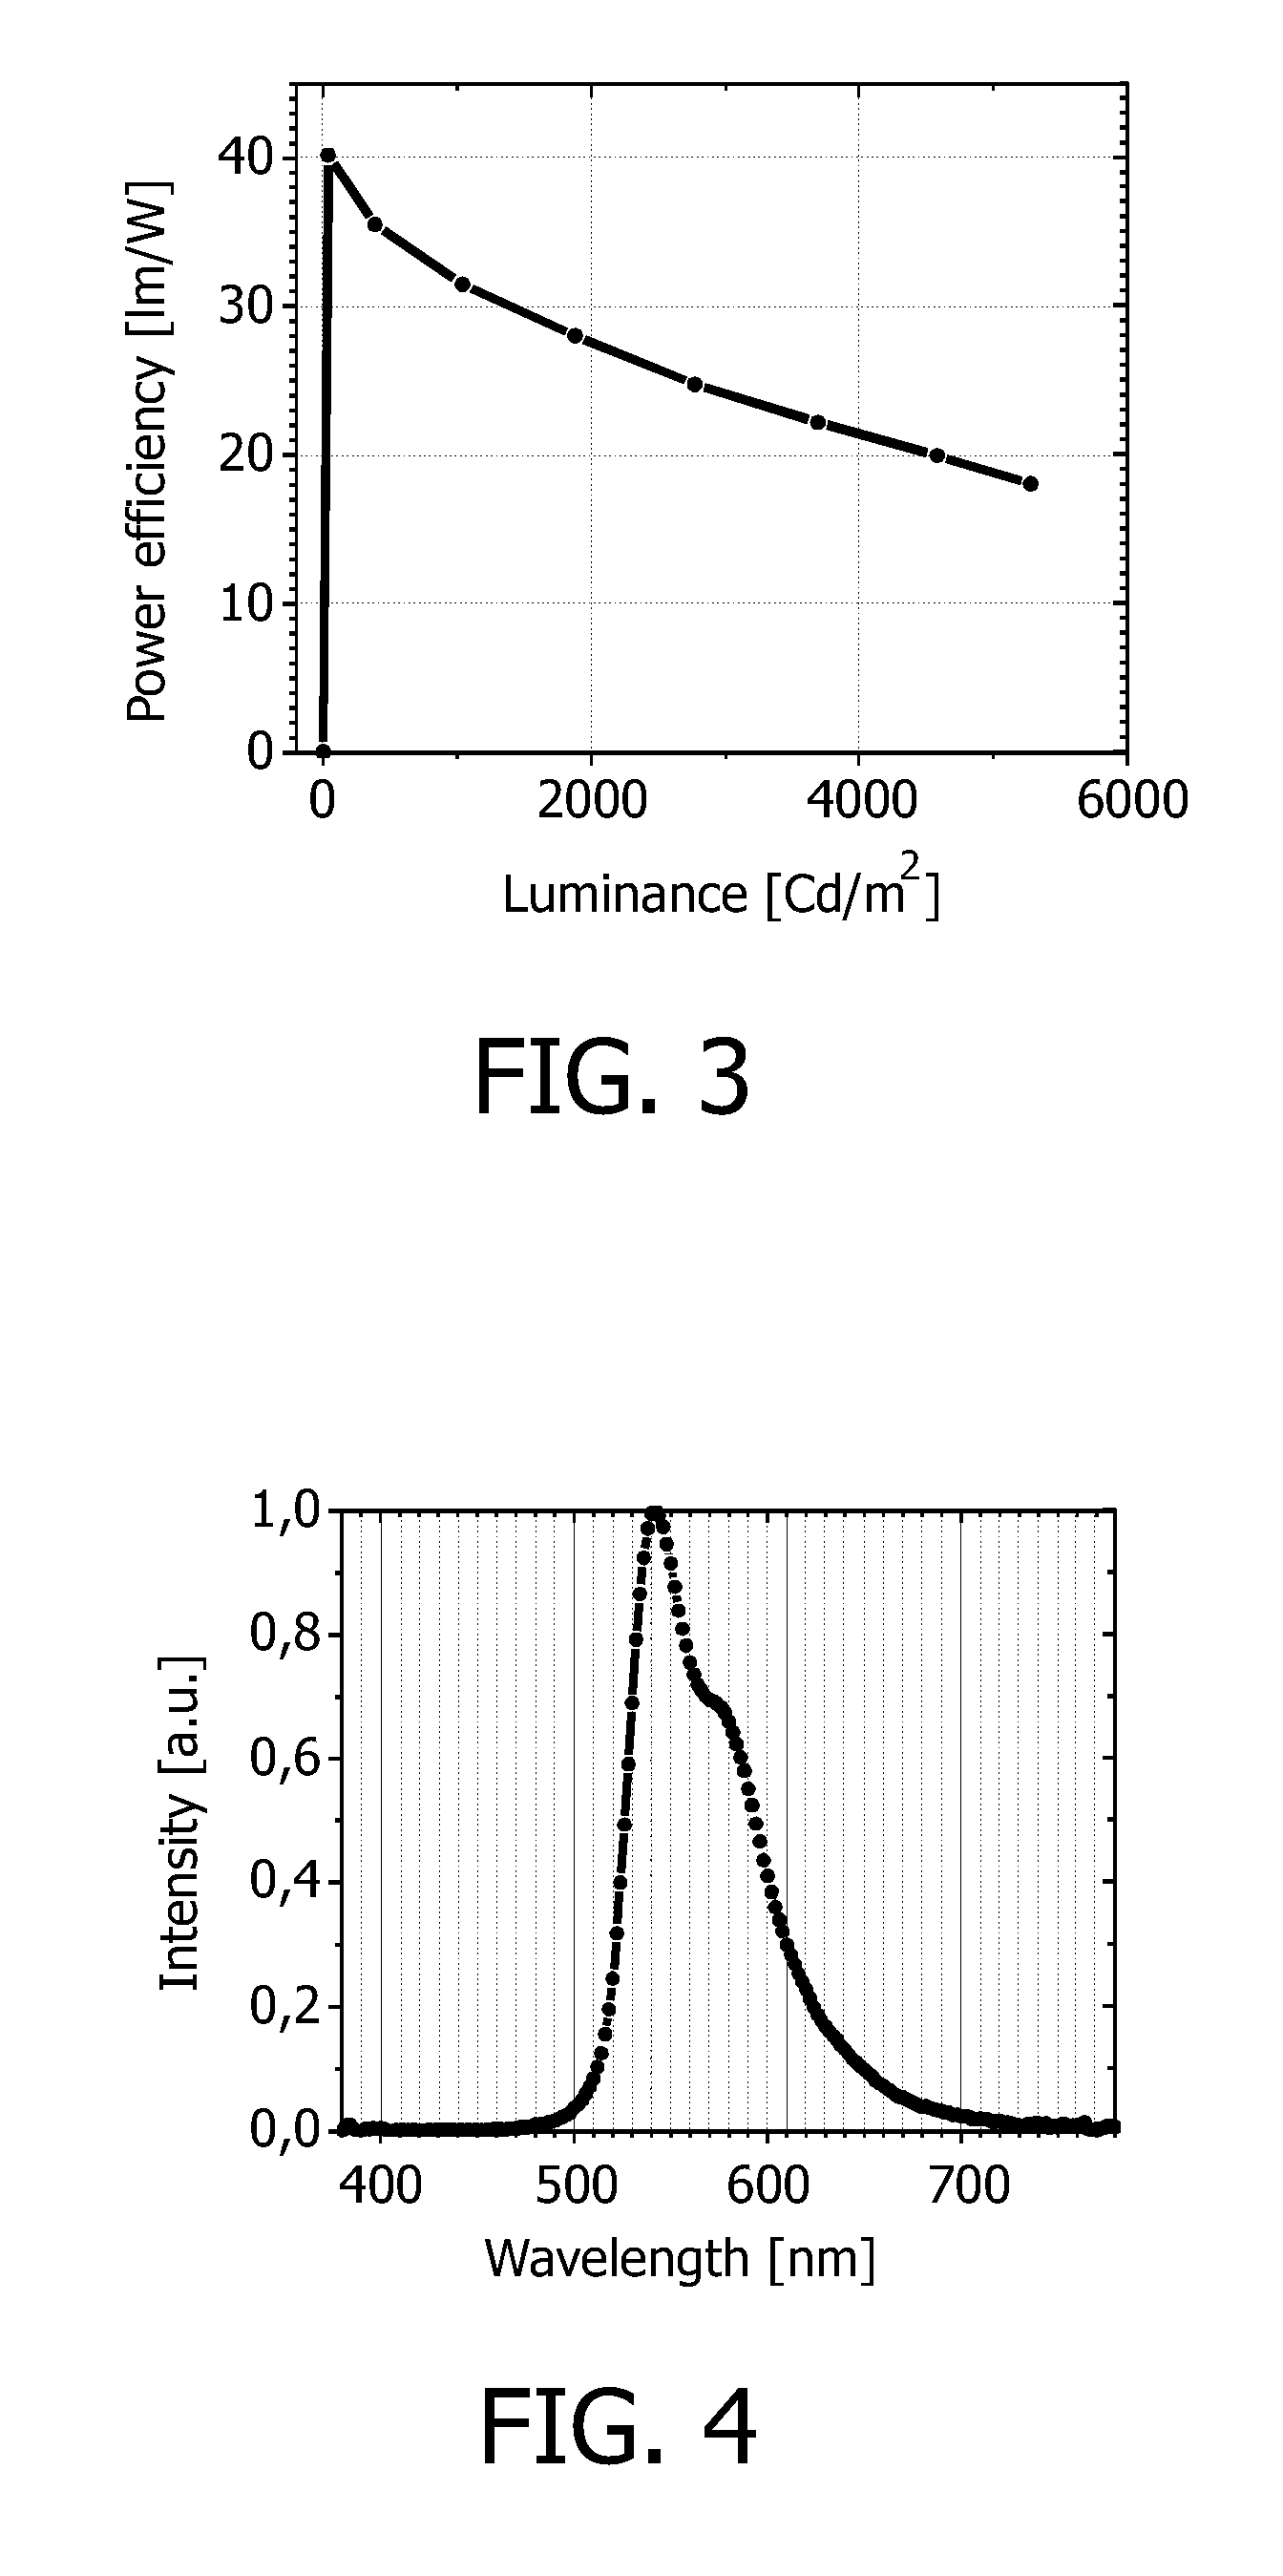 OLED with metal complexes having a high quantum efficiency